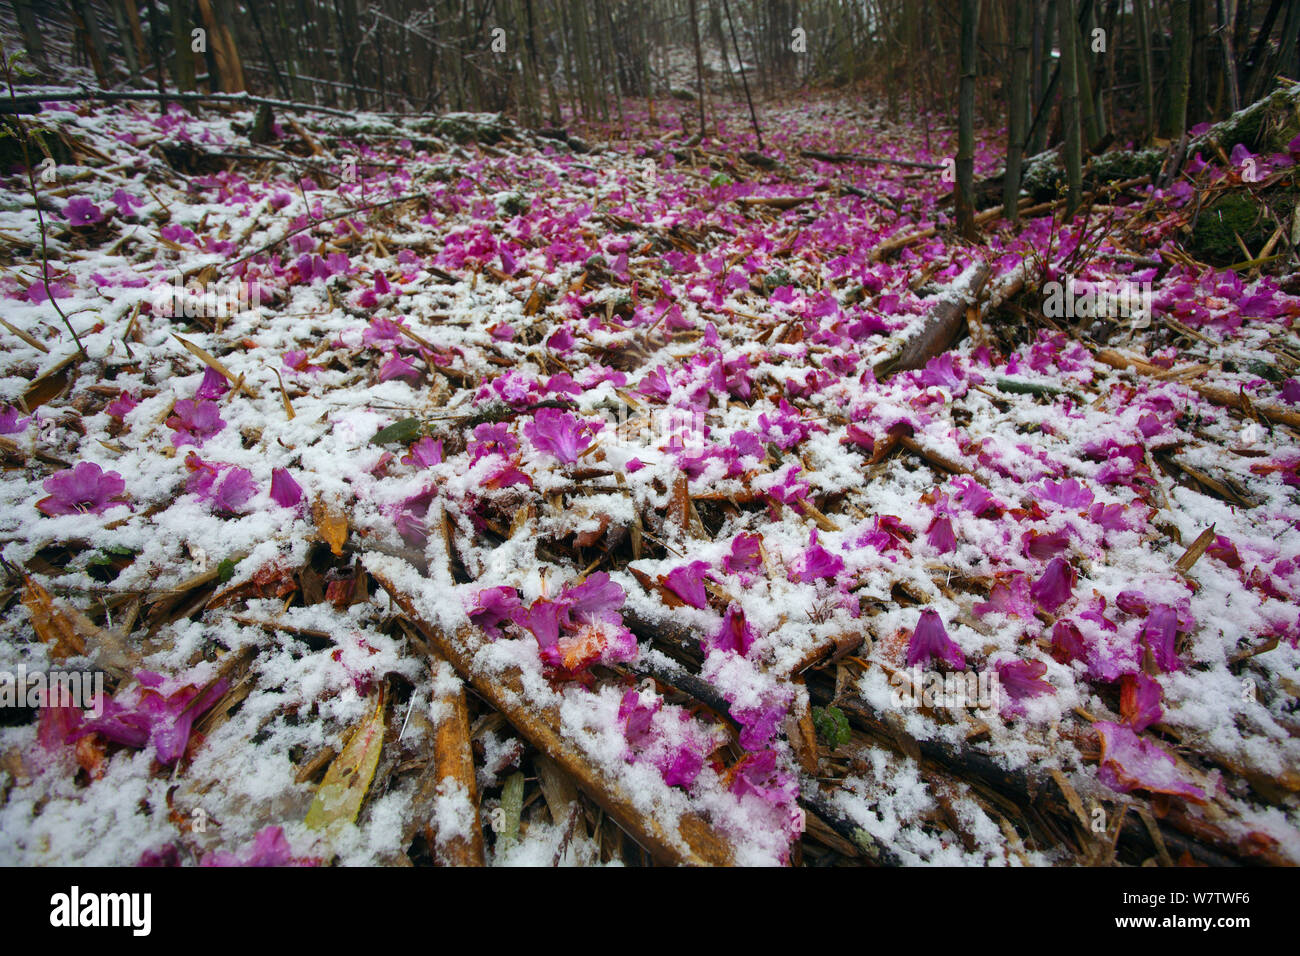 Fallen Rhododendron flowers (Rhododendro sp.) in snowy woodland, Lijiang City, Yunnan Province, China, April. Stock Photo